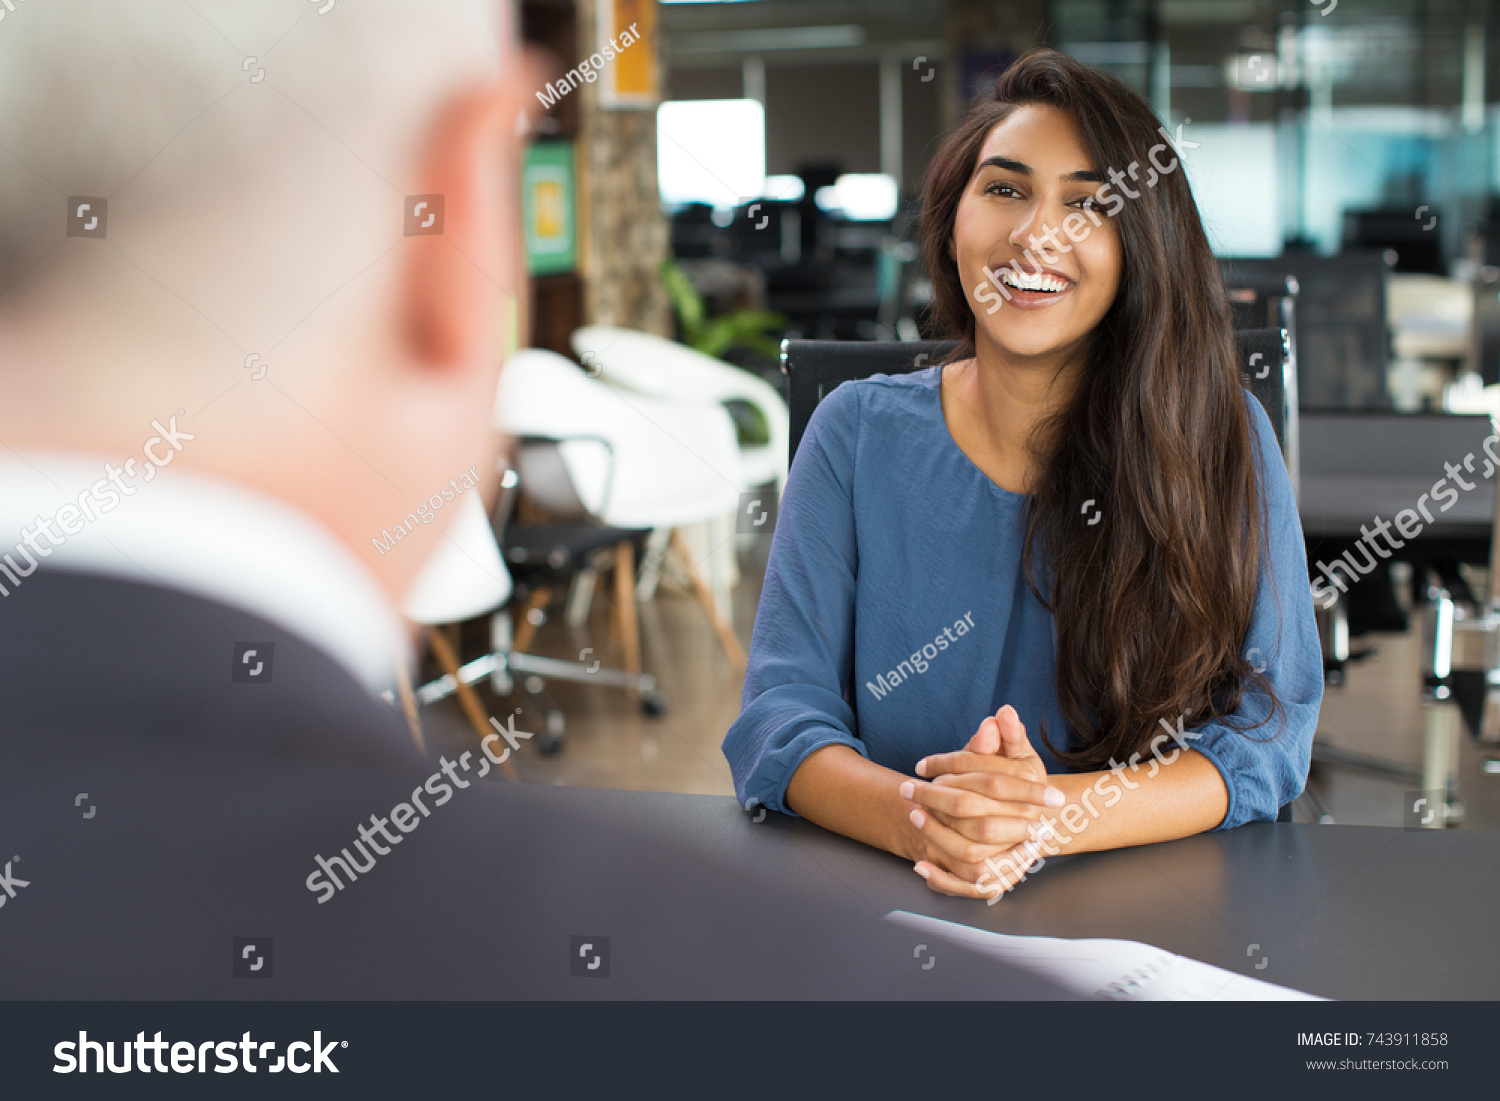 Young female candidate laughing at job interview #743911858